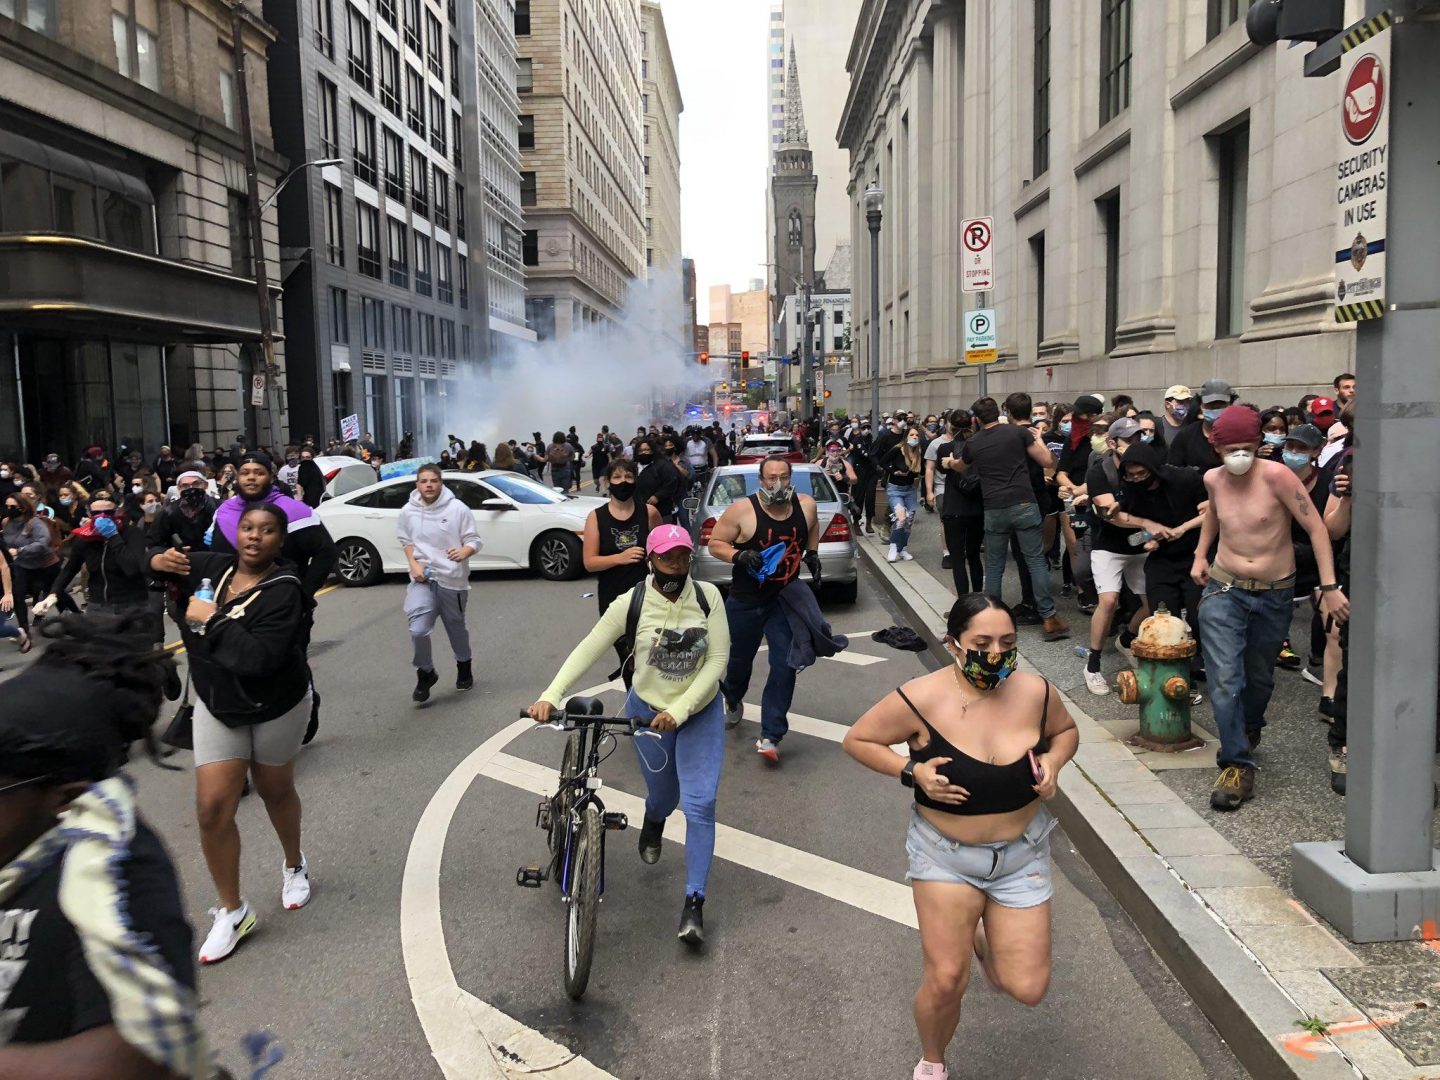 The U.S. Attorney's Office for Western Pennsylvania has charged 10 people in connection with the May 30 Black Lives Matter protest that took place in downtown Pittsburgh and ended in confrontations between marchers and police.